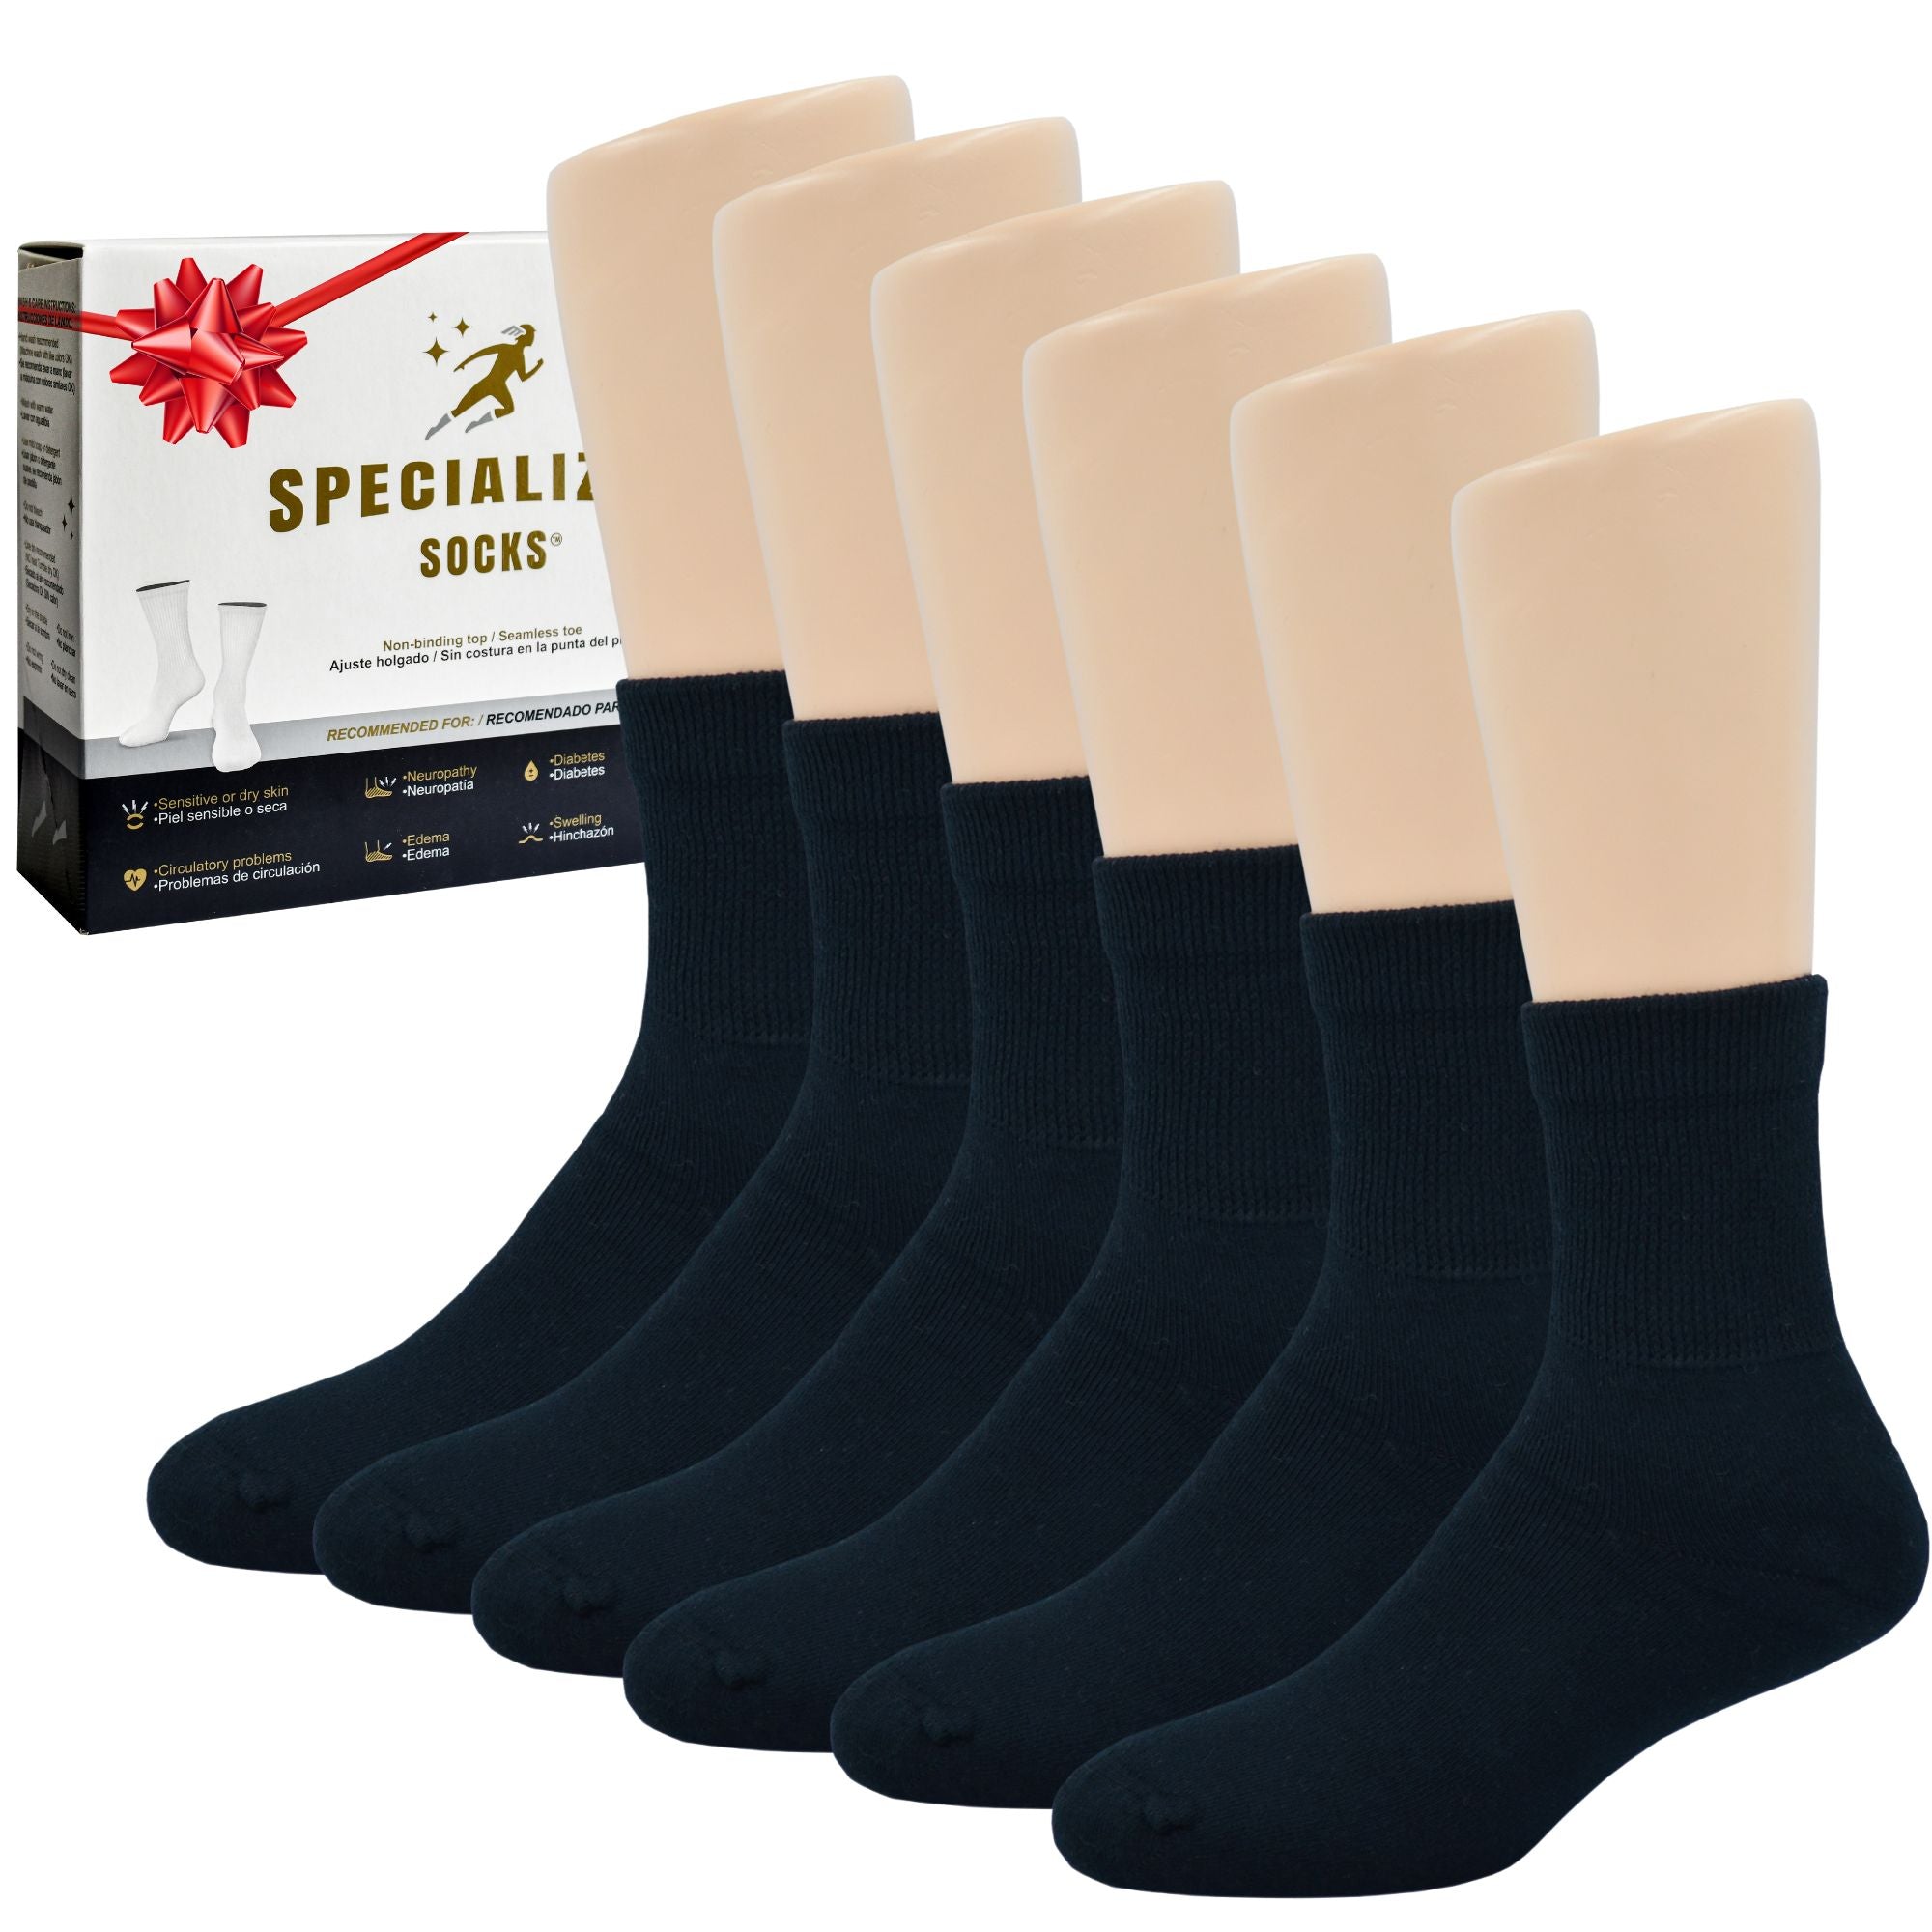 Mens Striped Stockings Thickened & Warm For Autumn/Winter  Calcetines  Para Diabeticos Hombre Divertidos Z230629 From Misihan01, $1.93